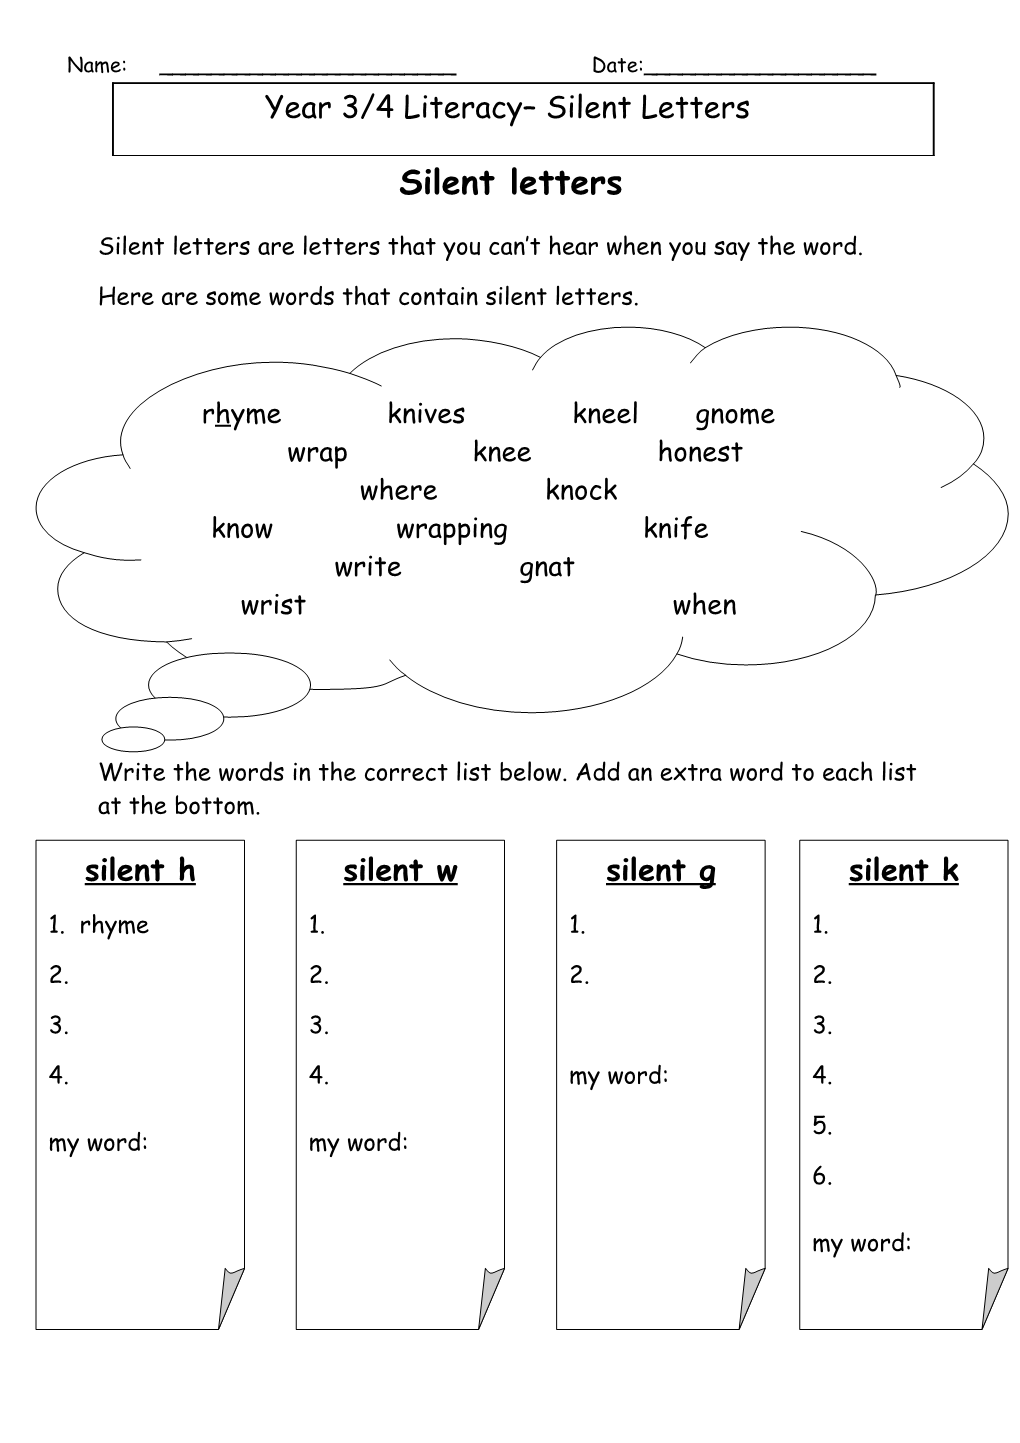 Year 3/4 Literacy Silent Letters